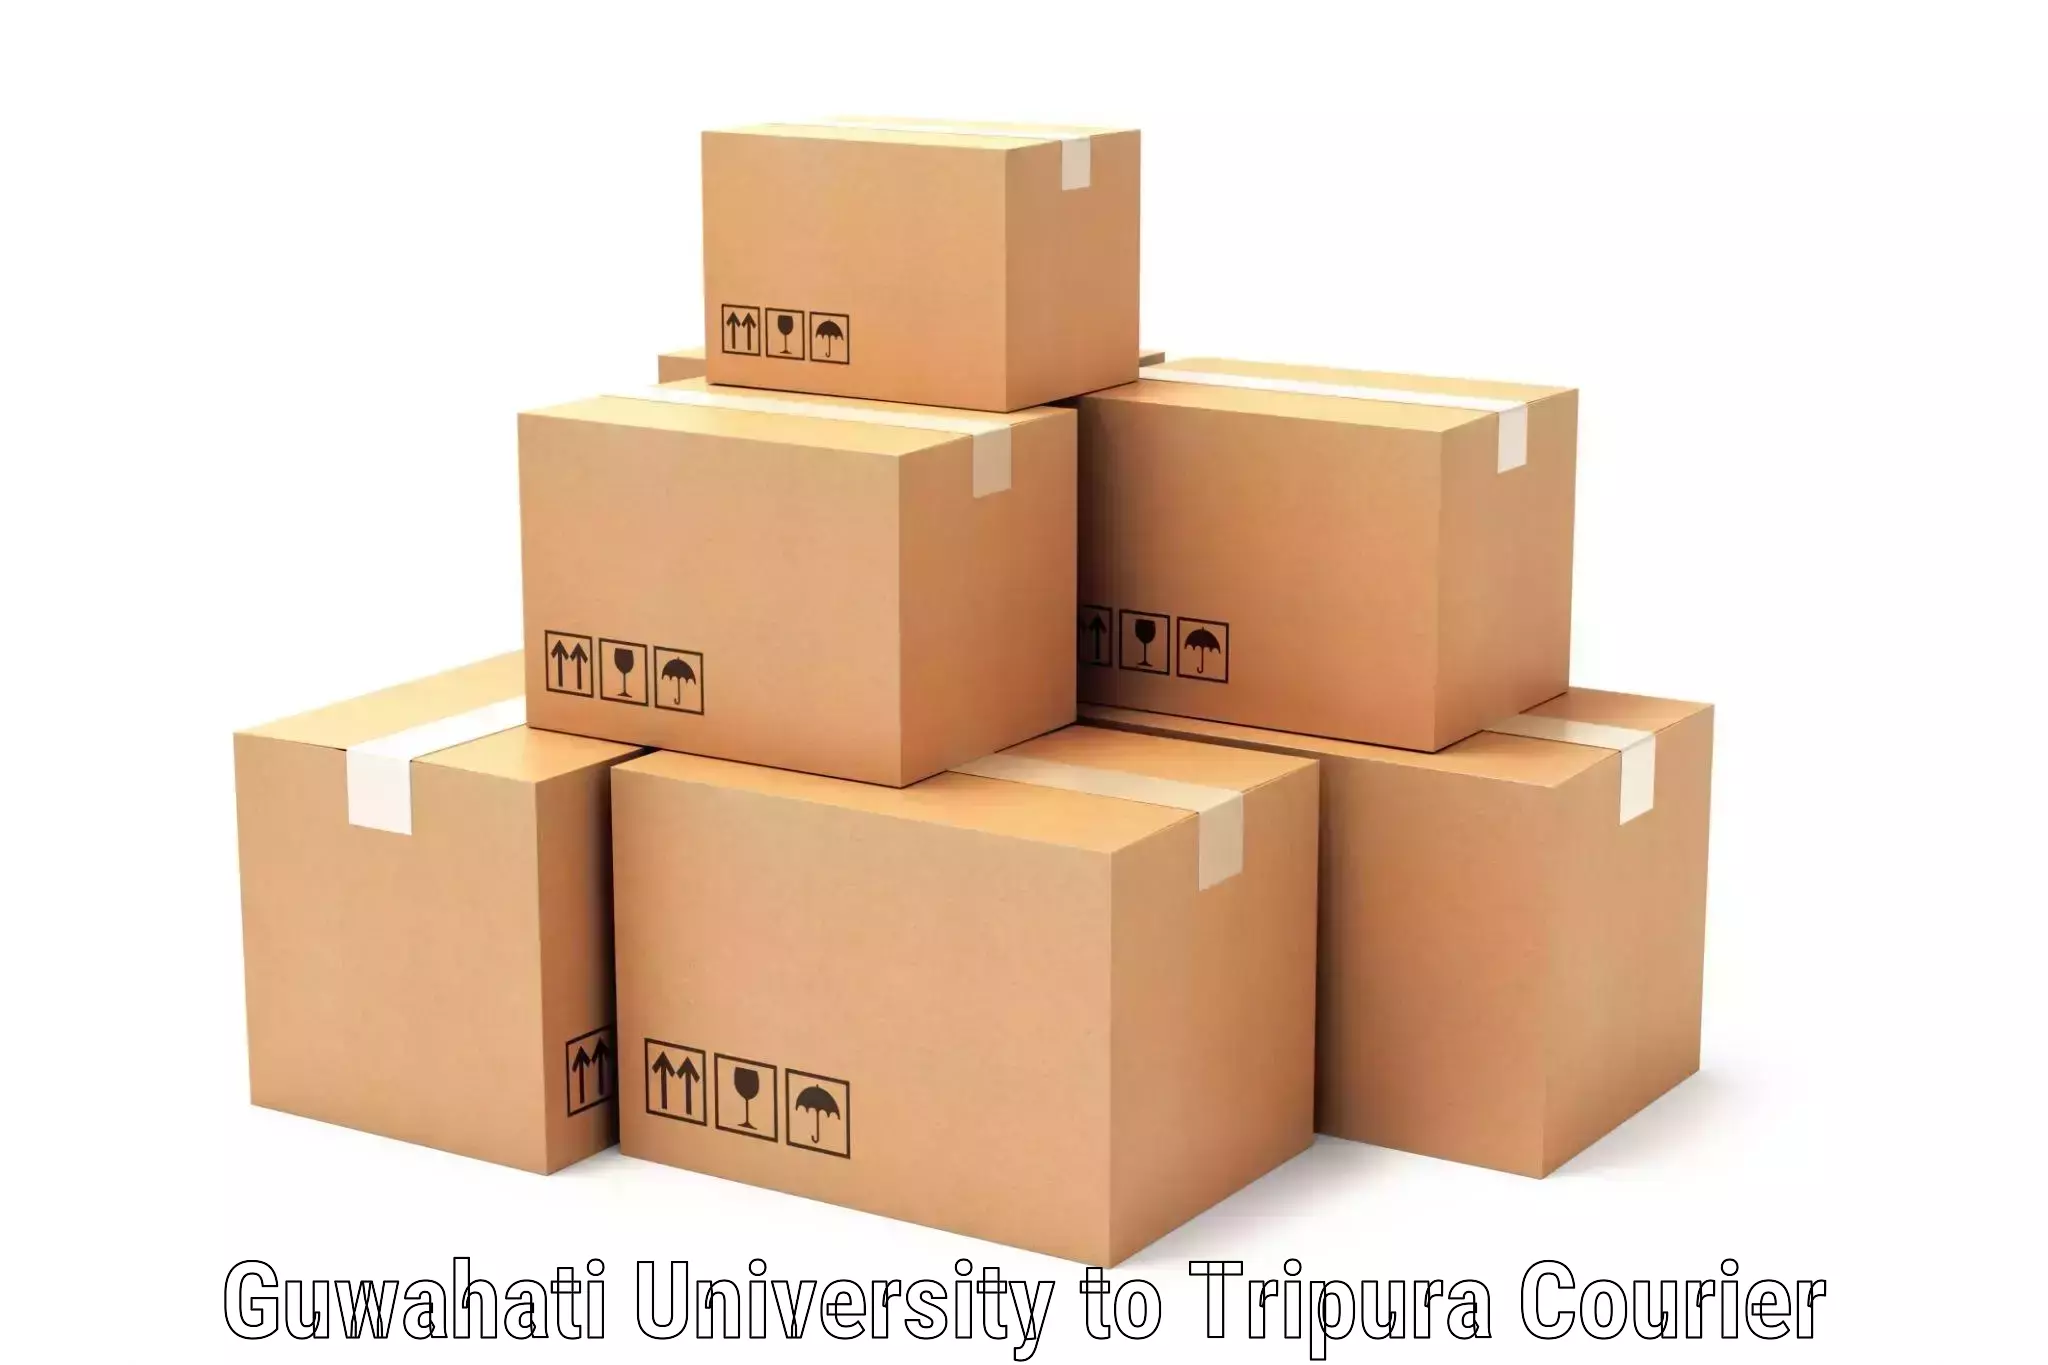 Express package services Guwahati University to Tripura